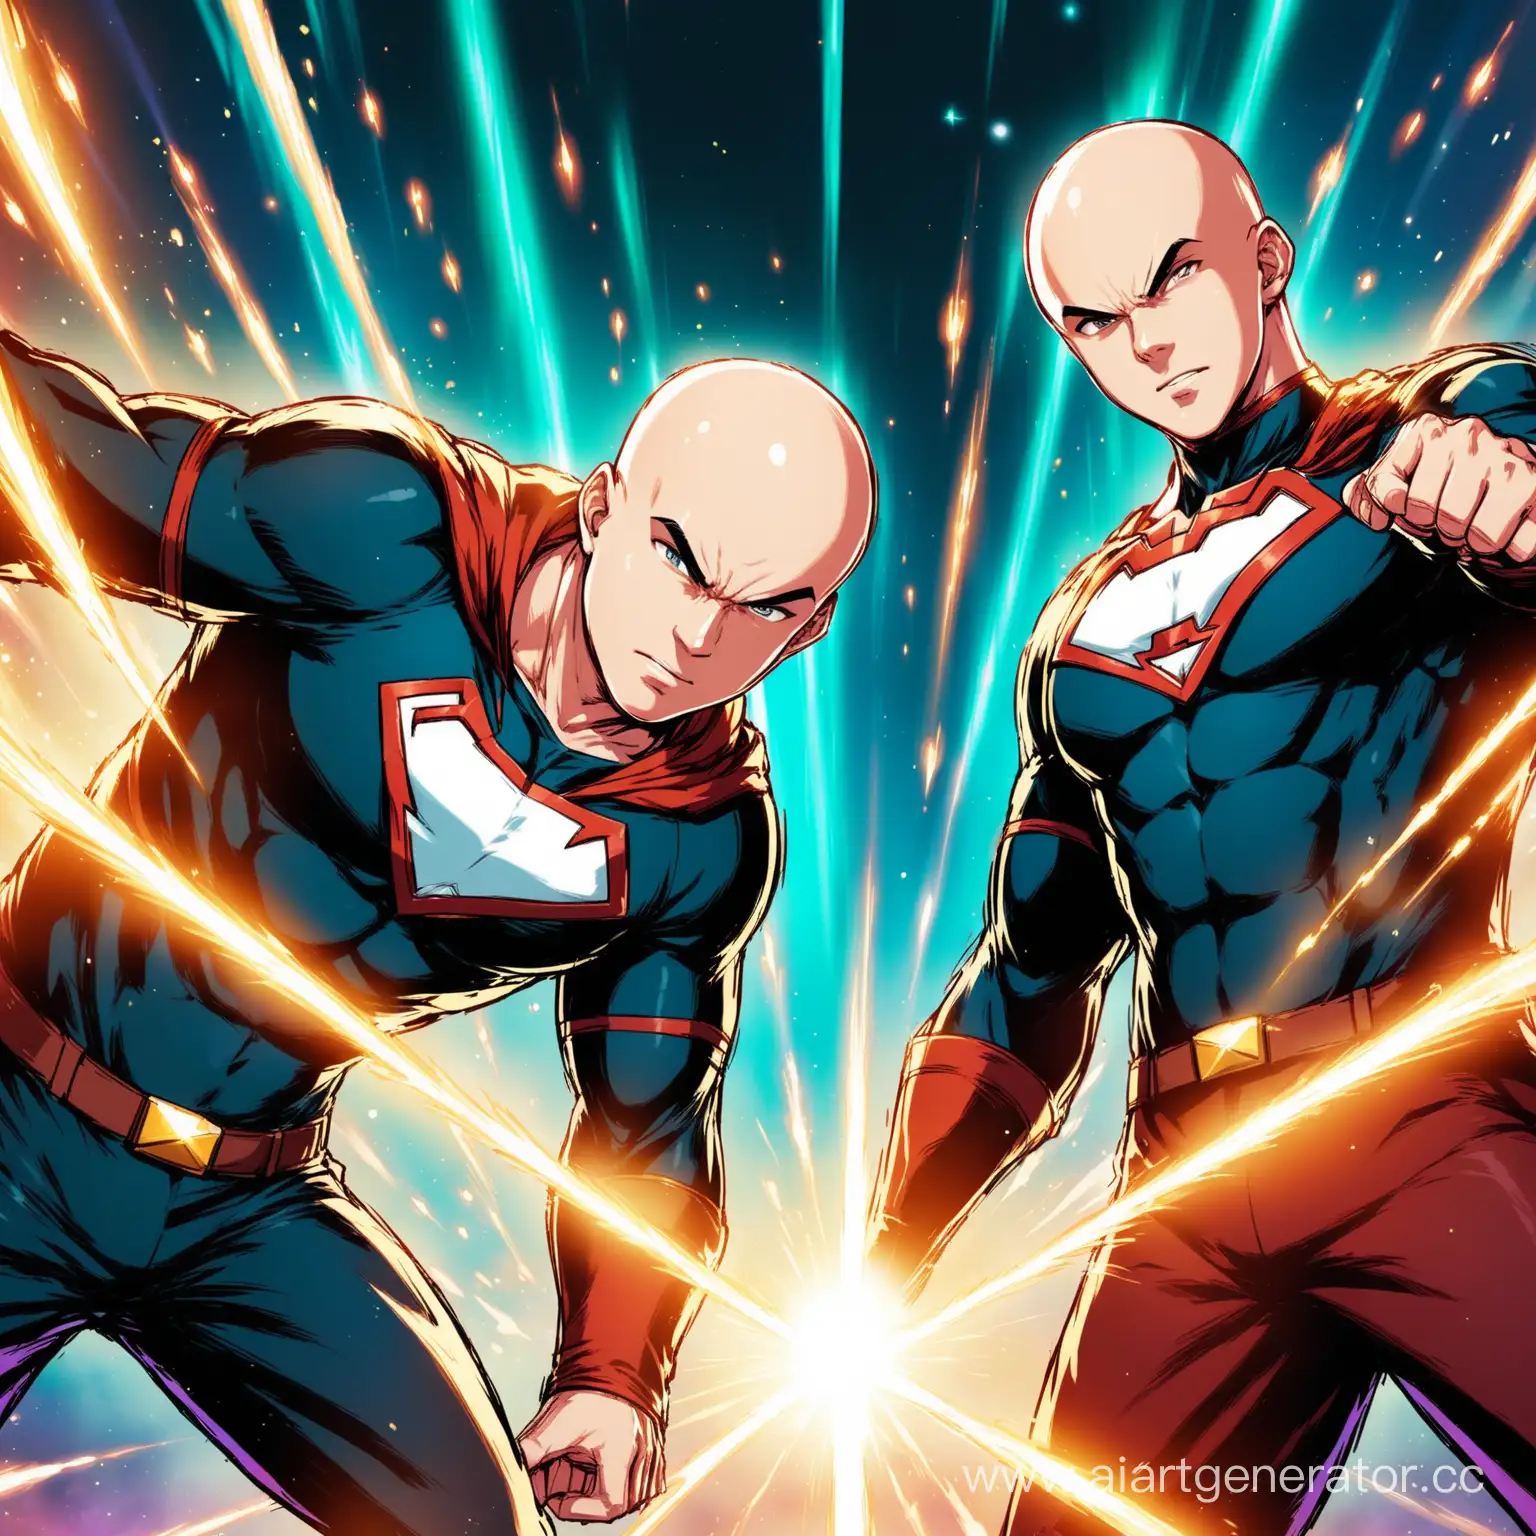 Bald-Superpowered-Brothers-Shooting-Eye-Beams-in-Gamer-Environment